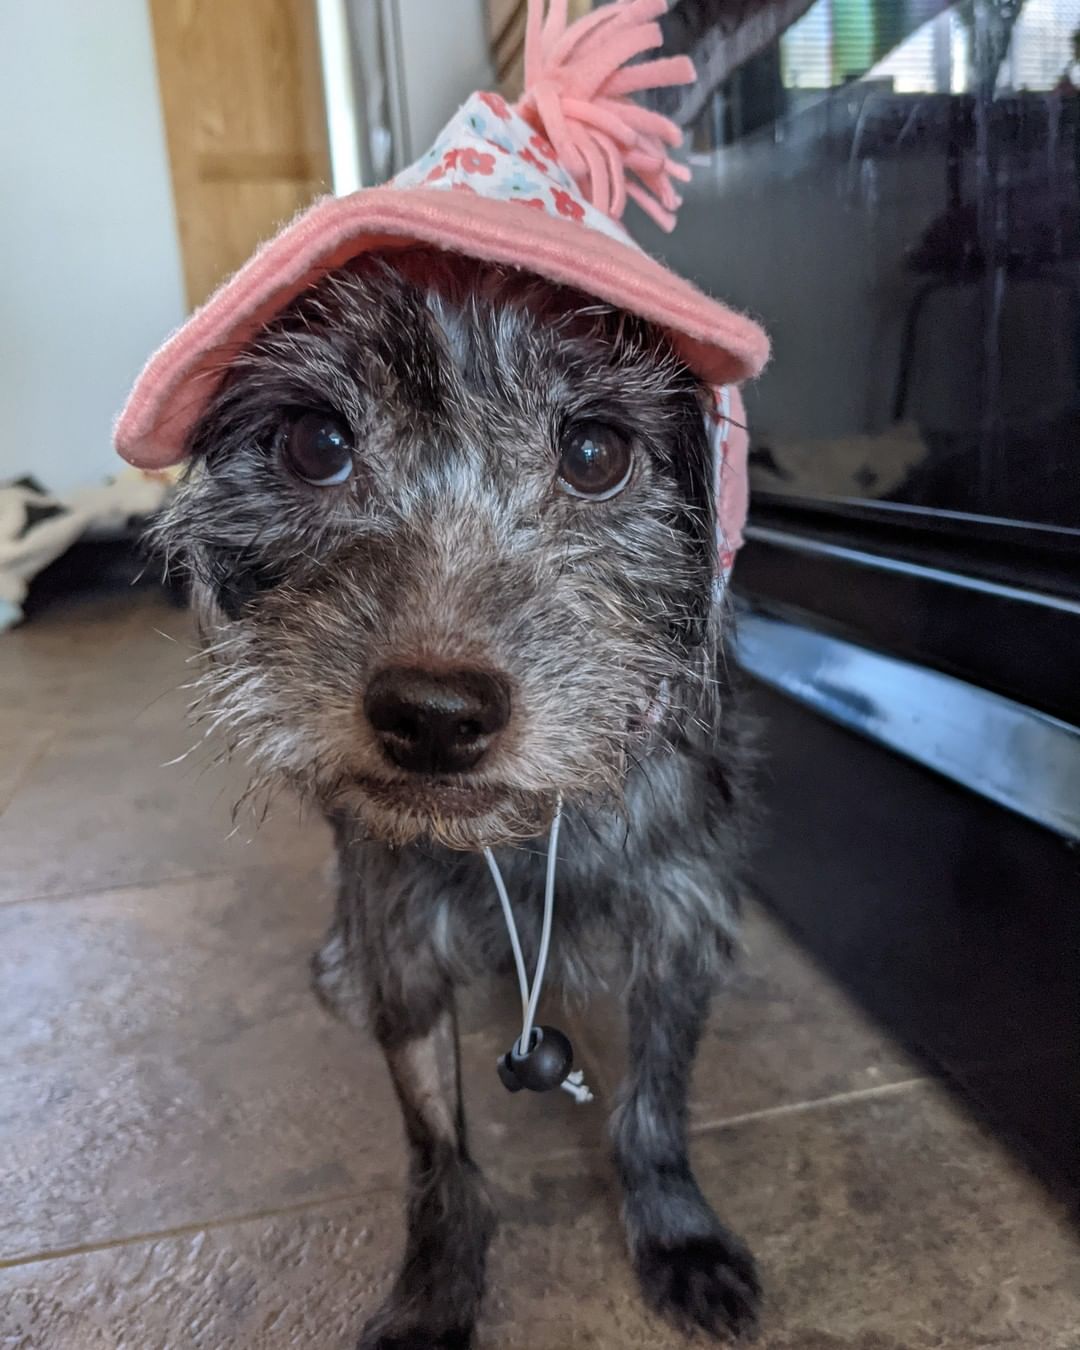 How adorable is Baby Girl in her fancy pink hat?!

Our sweet girl is settling in well at her foster home. Initially, she was a bit shy and nervous but she has been coming out of her shell more and more each day! She continues to recover well after her procedure, and will see the doctor for a re-check soon.

We will announce as soon as she is ready for adoption and when we will start accepting applications! Thank you to those who have donated and who ask about her progress - we are so grateful for your ongoing support!

<a target='_blank' href='https://www.instagram.com/explore/tags/recovery/'>#recovery</a> <a target='_blank' href='https://www.instagram.com/explore/tags/postop/'>#postop</a> <a target='_blank' href='https://www.instagram.com/explore/tags/fosteringsaveslives/'>#fosteringsaveslives</a> <a target='_blank' href='https://www.instagram.com/explore/tags/fosterhome/'>#fosterhome</a> <a target='_blank' href='https://www.instagram.com/explore/tags/rescue/'>#rescue</a> <a target='_blank' href='https://www.instagram.com/explore/tags/rescuedog/'>#rescuedog</a> <a target='_blank' href='https://www.instagram.com/explore/tags/adopt/'>#adopt</a> <a target='_blank' href='https://www.instagram.com/explore/tags/adoptadoginc/'>#adoptadoginc</a> <a target='_blank' href='https://www.instagram.com/explore/tags/toocute/'>#toocute</a> <a target='_blank' href='https://www.instagram.com/explore/tags/dogsofinstagram/'>#dogsofinstagram</a> <a target='_blank' href='https://www.instagram.com/explore/tags/terrier/'>#terrier</a> <a target='_blank' href='https://www.instagram.com/explore/tags/terriermix/'>#terriermix</a> <a target='_blank' href='https://www.instagram.com/explore/tags/fancy/'>#fancy</a> <a target='_blank' href='https://www.instagram.com/explore/tags/westchestercounty/'>#westchestercounty</a> <a target='_blank' href='https://www.instagram.com/explore/tags/fairfieldcounty/'>#fairfieldcounty</a>